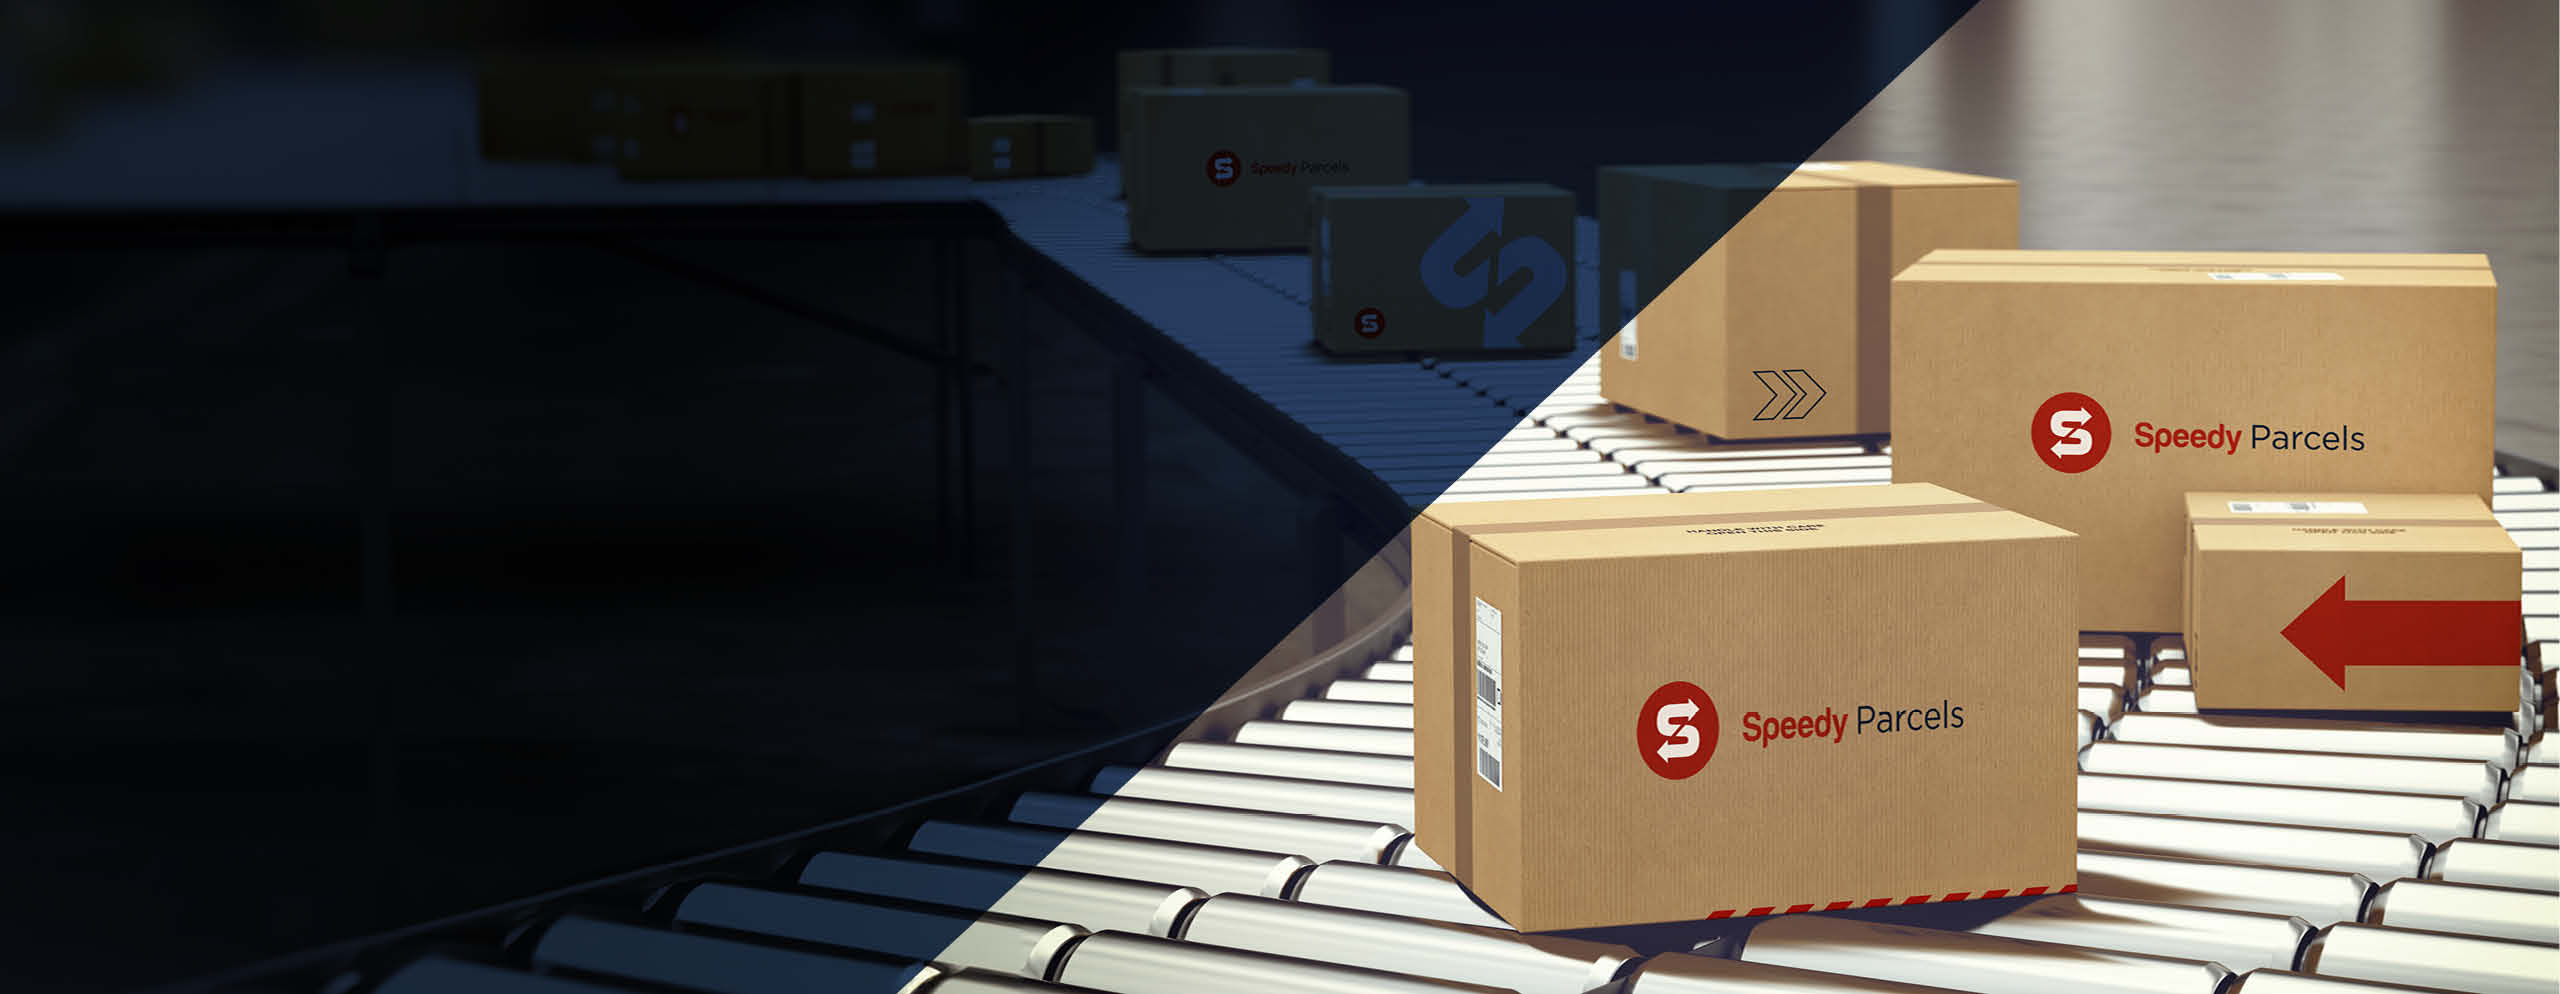 Benefits of Using Speedy Parcels for Your Business Parcel Deliveries  